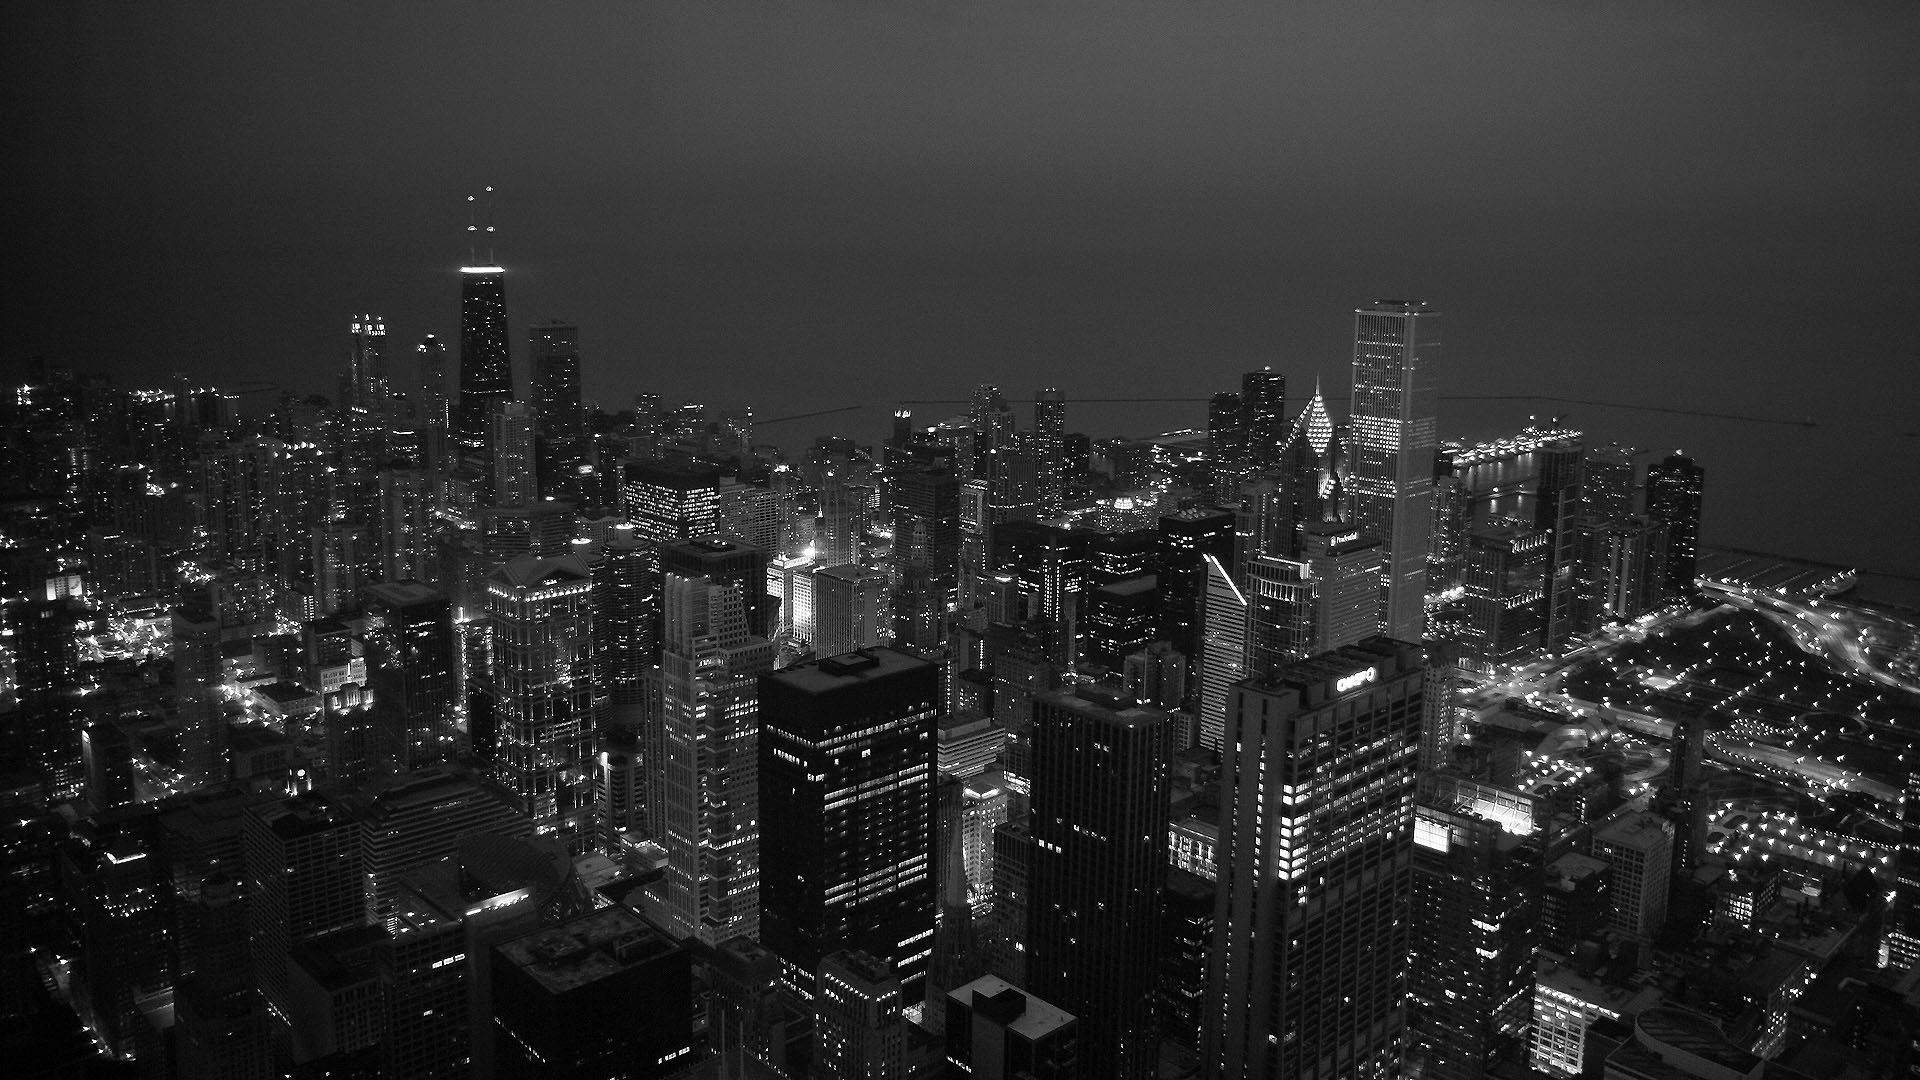 Metropolitan Sophistication - A stunning black and white view of a city skyline. Wallpaper